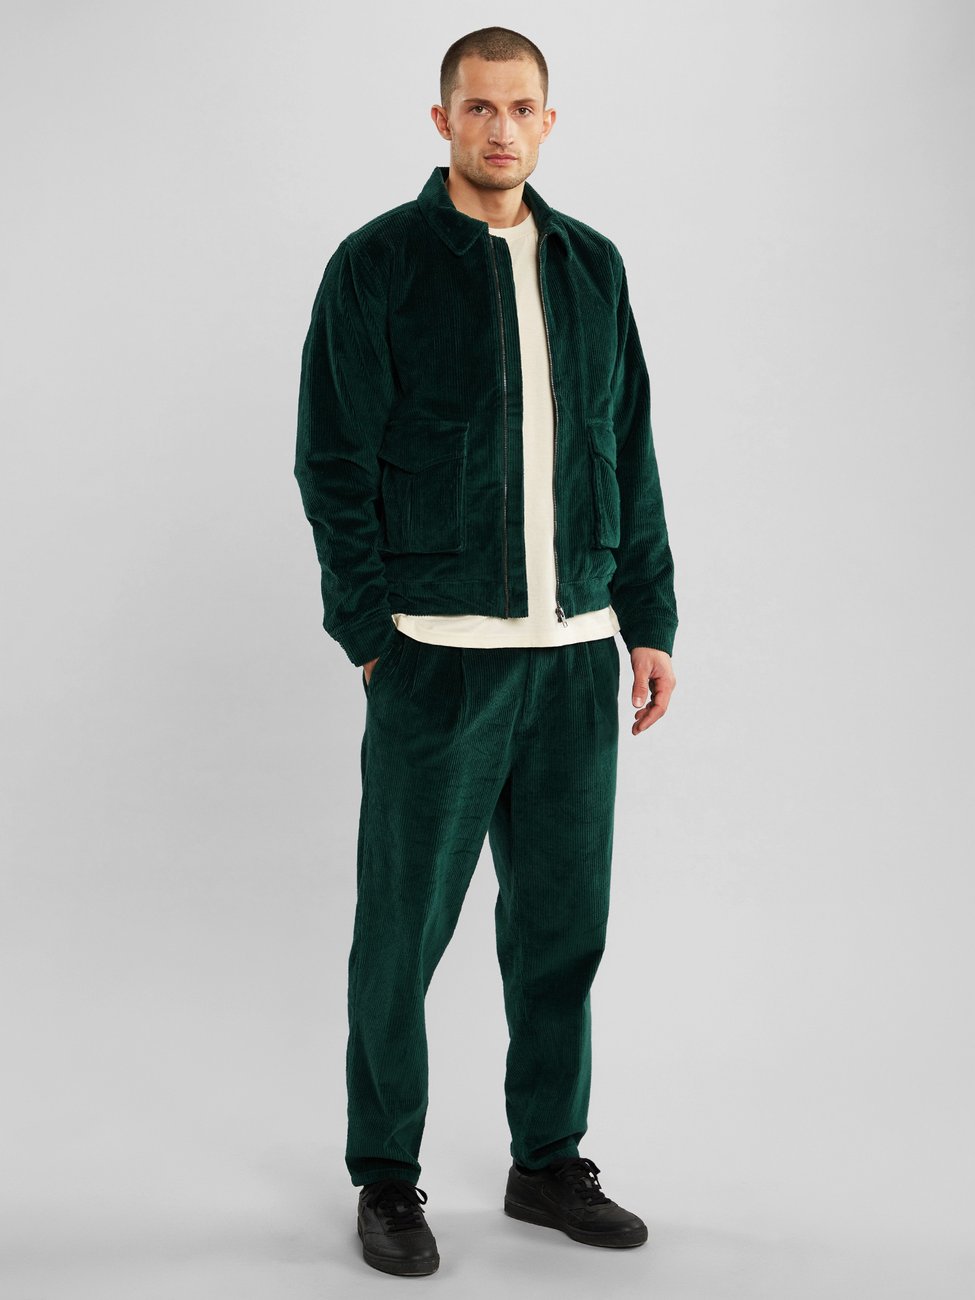 Male model wearing dark green corduroy pants with a matching jacket and a white top underneath from sustainable brand Dedicated